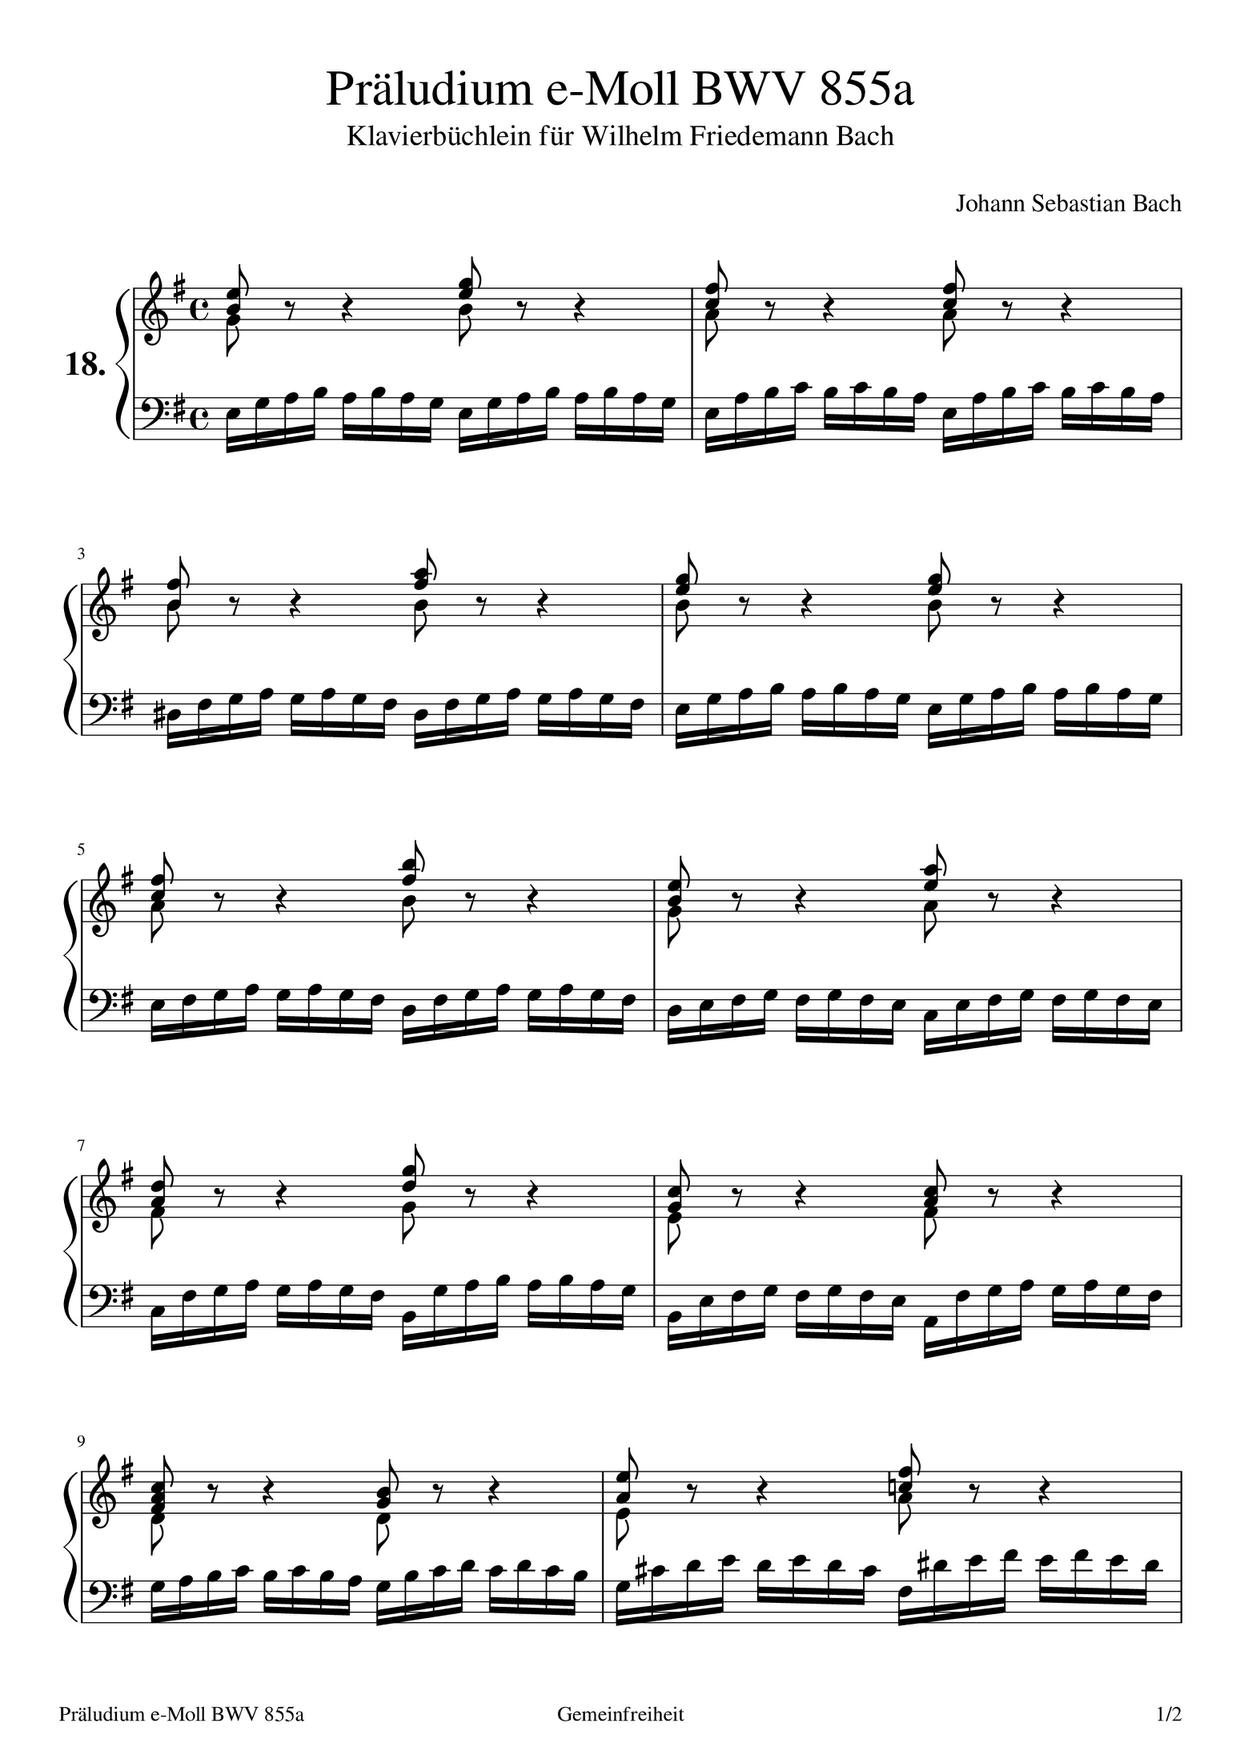 Prelude in B minor, BWV 855aピアノ譜